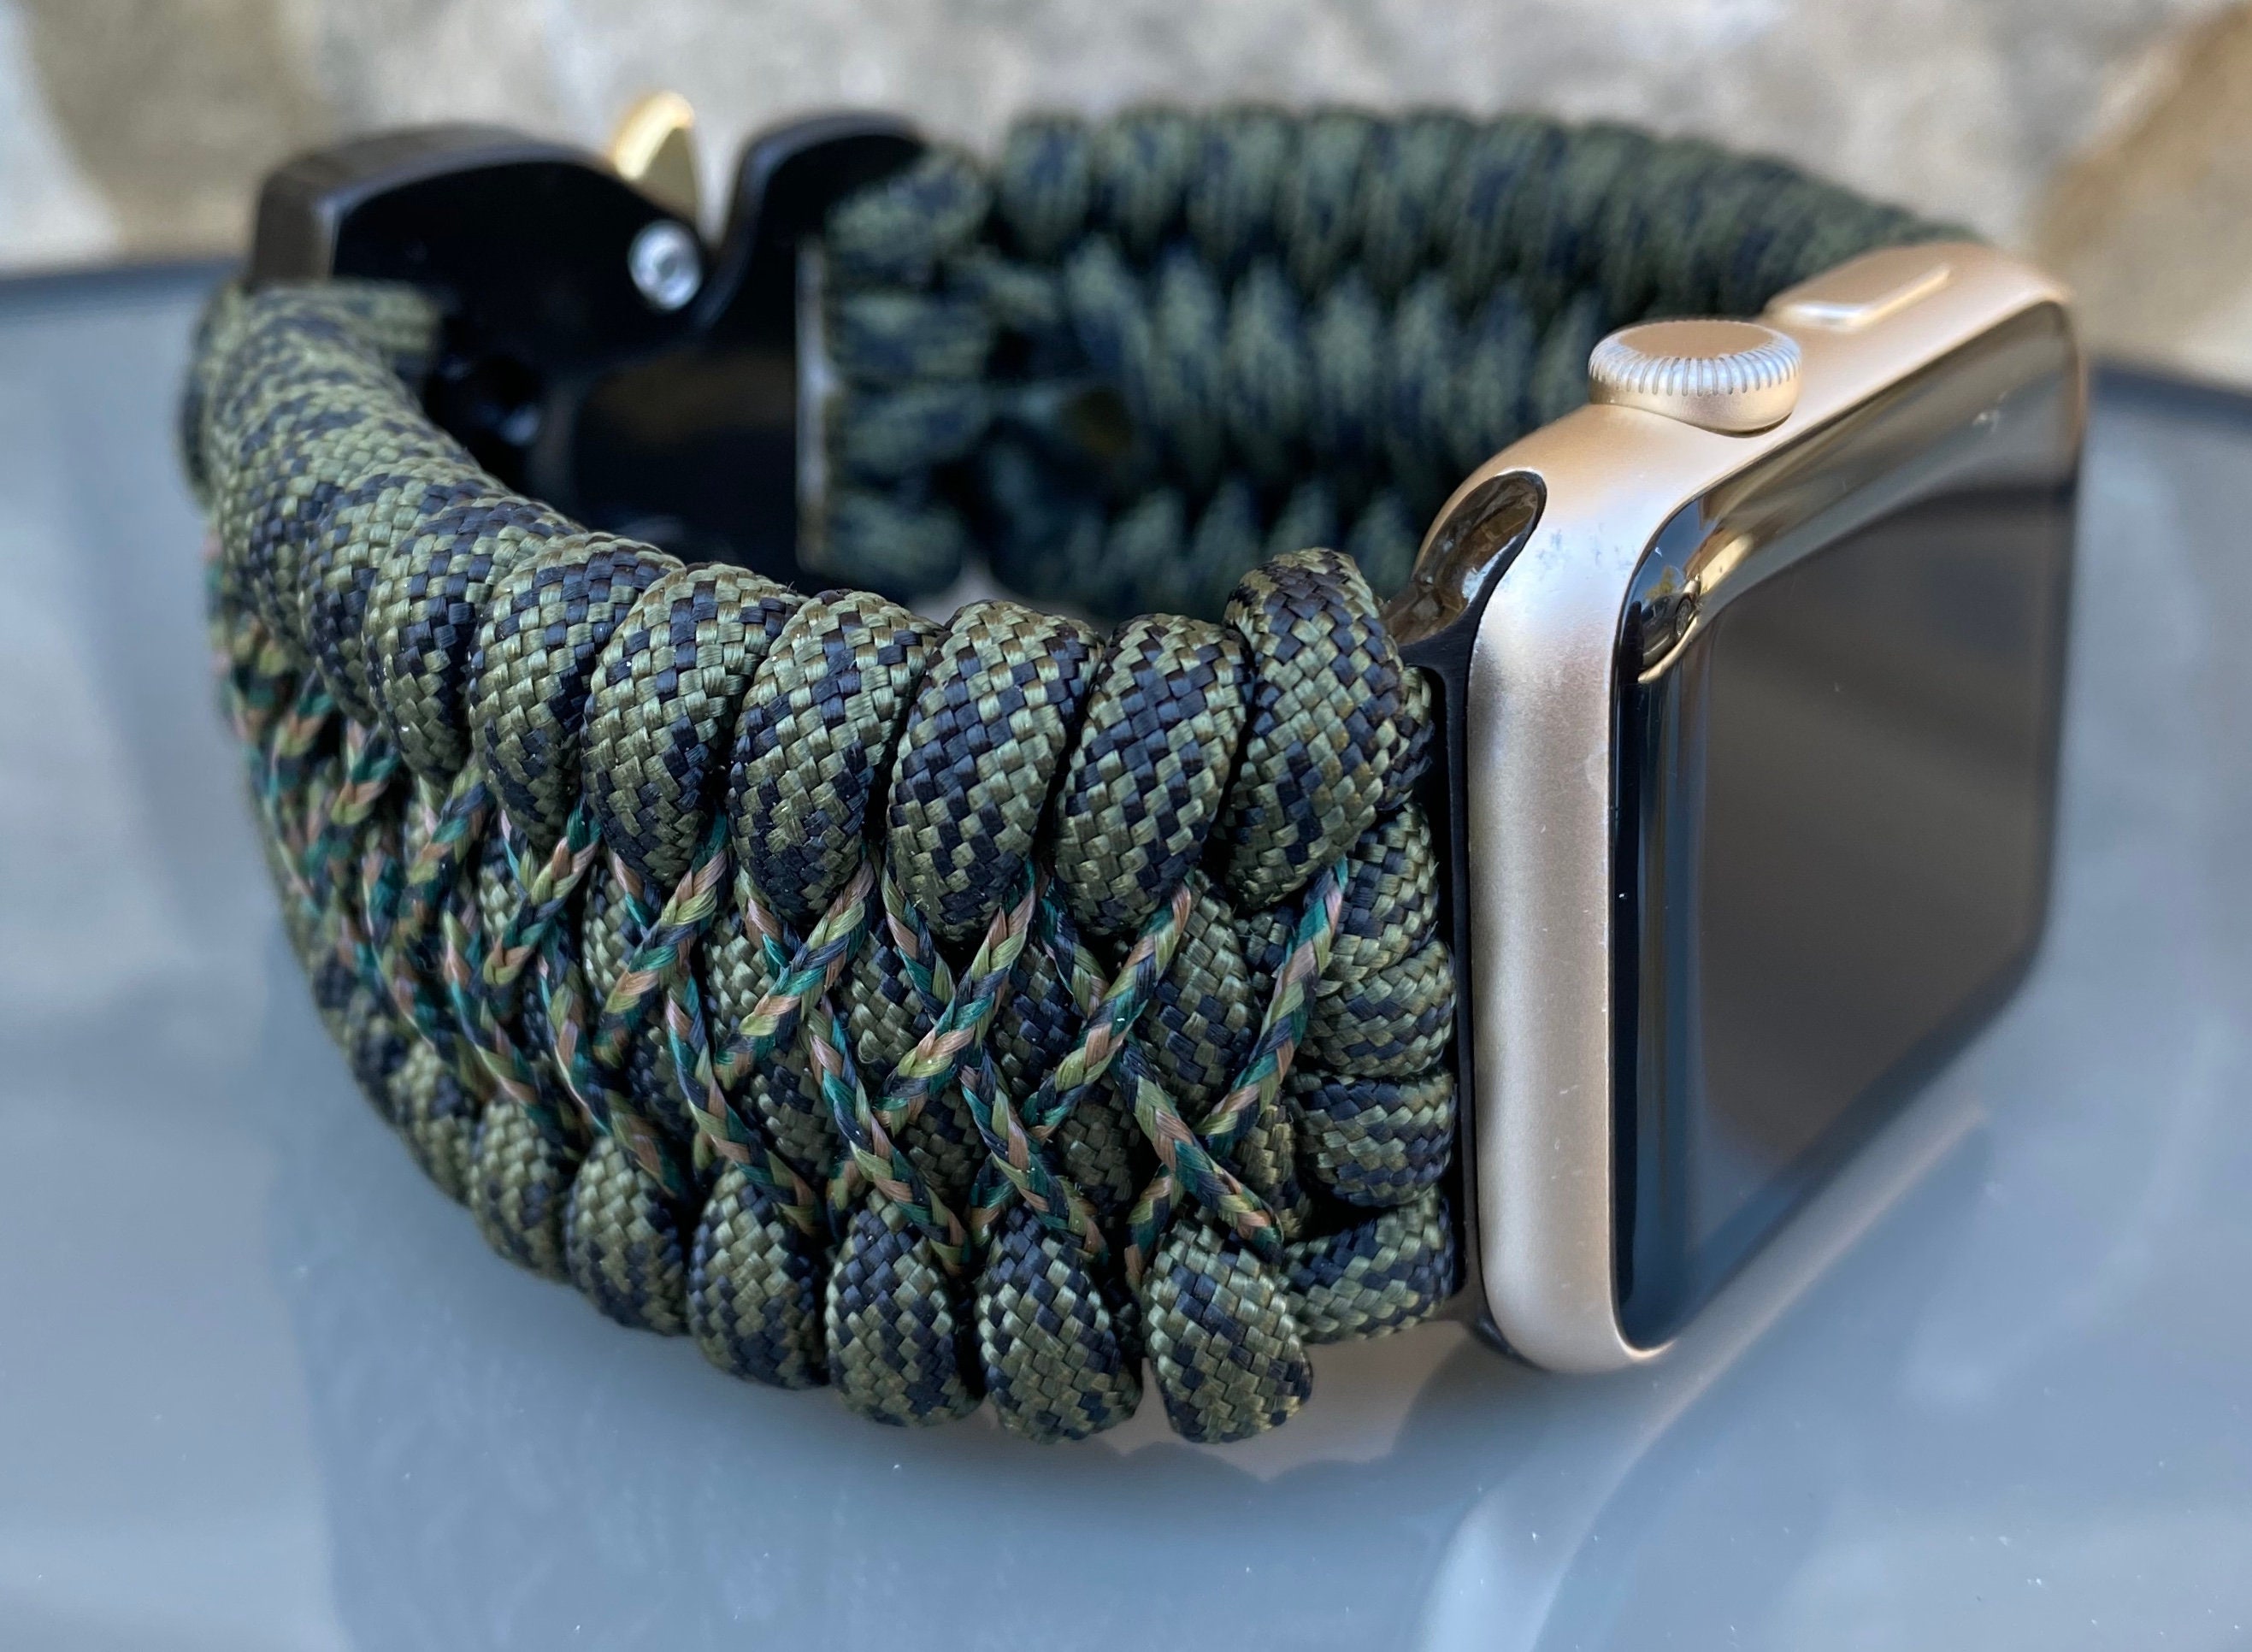 Paracord Watch Band for Apple Watch Series 1 2 3 4 5 6 - Etsy